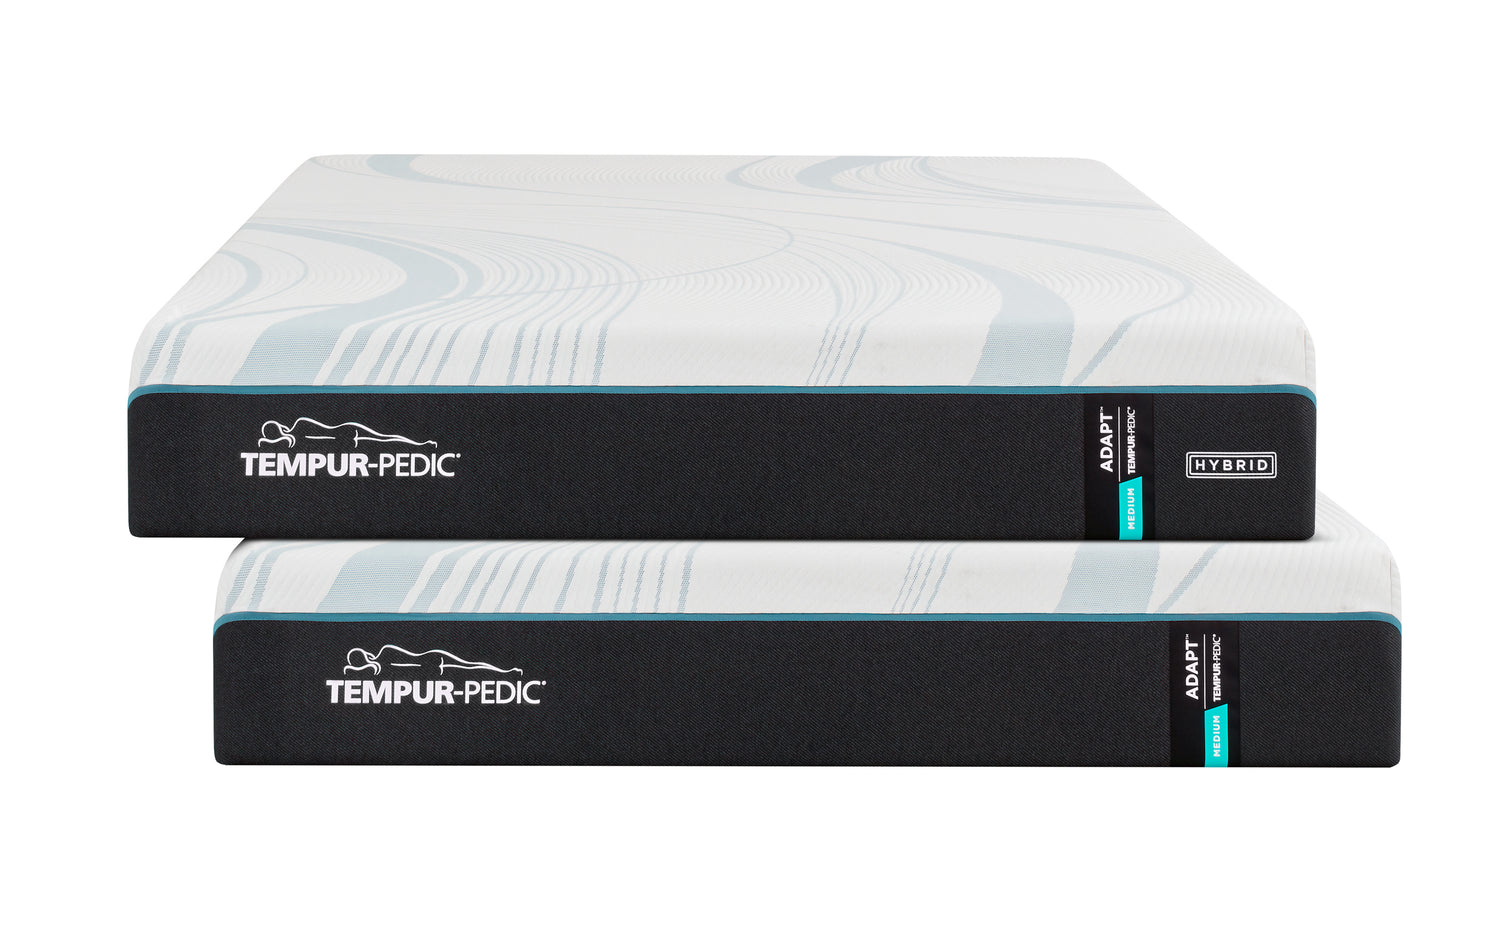 tempurpedic adapt mattresses stacked on top of each other